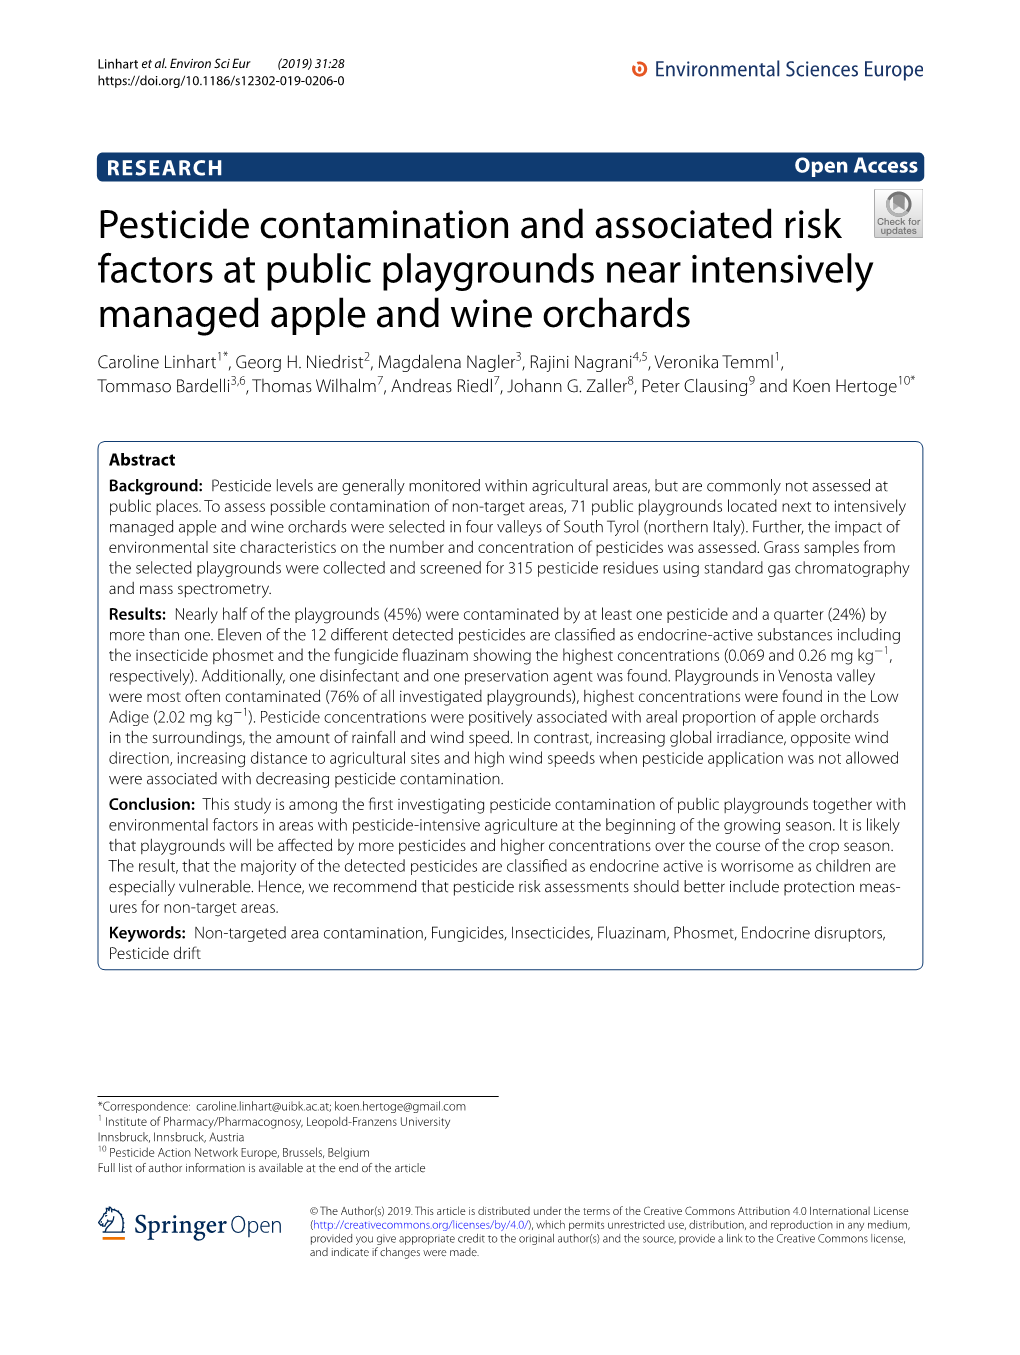 Pesticide Contamination and Associated Risk Factors at Public Playgrounds Near Intensively Managed Apple and Wine Orchards Caroline Linhart1*, Georg H